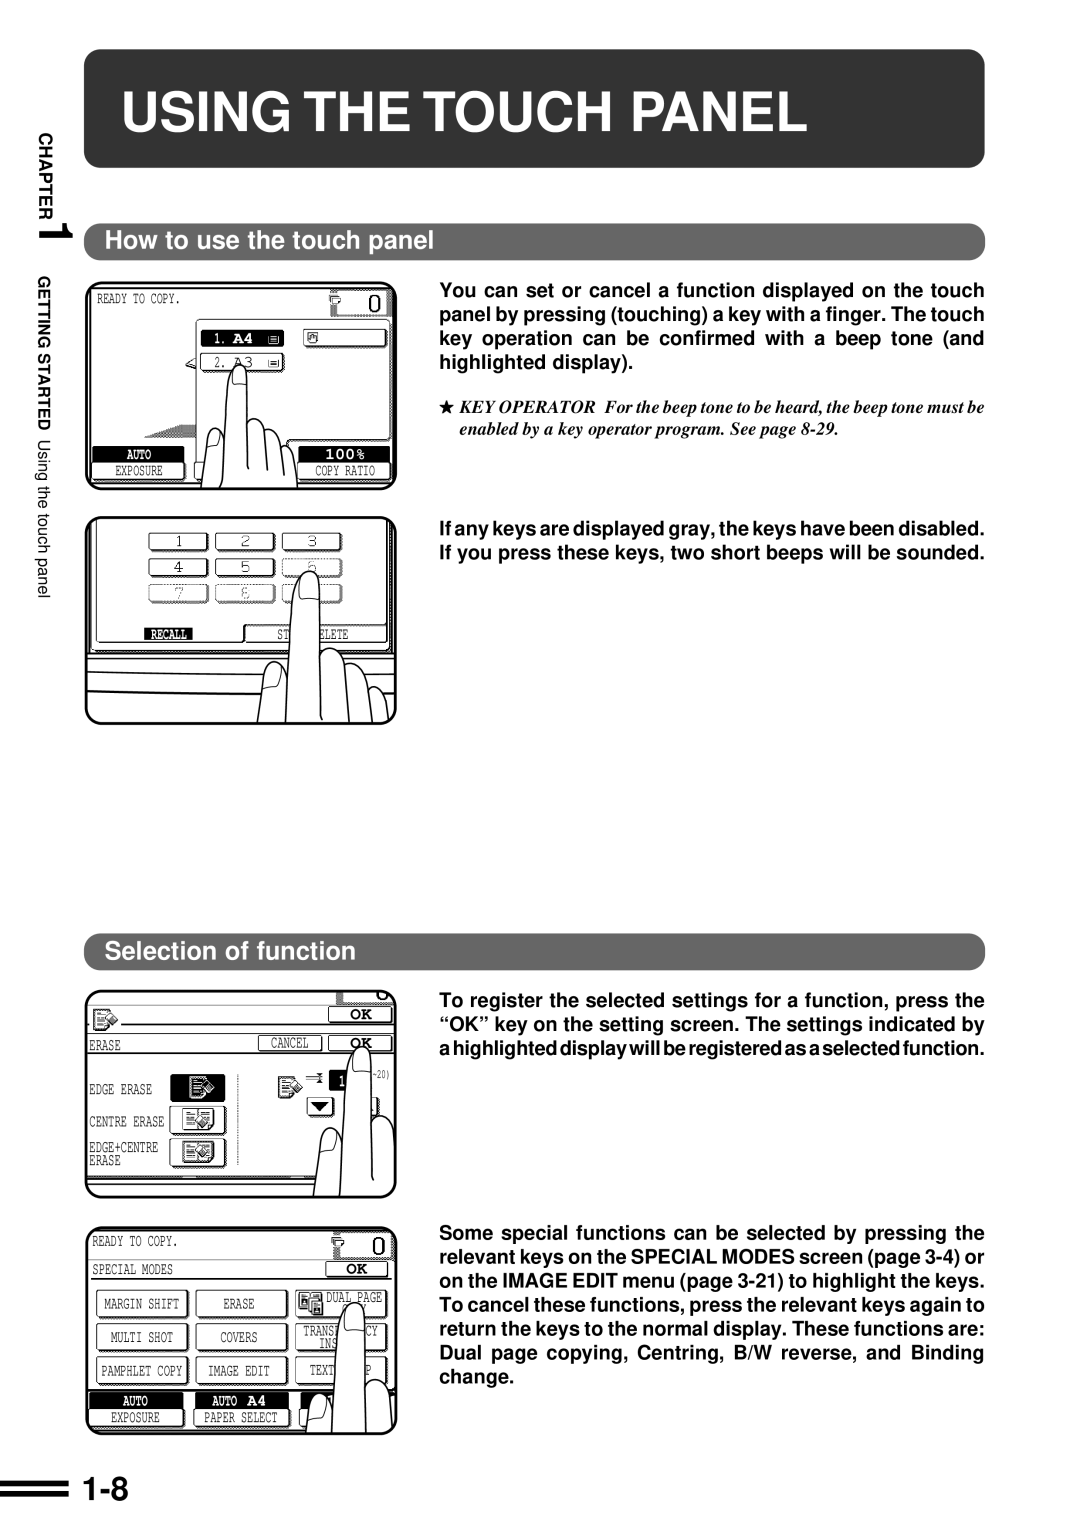 Sharp AR-507 operation manual Using The Touch Panel, How to use the touch panel, Selection of function 